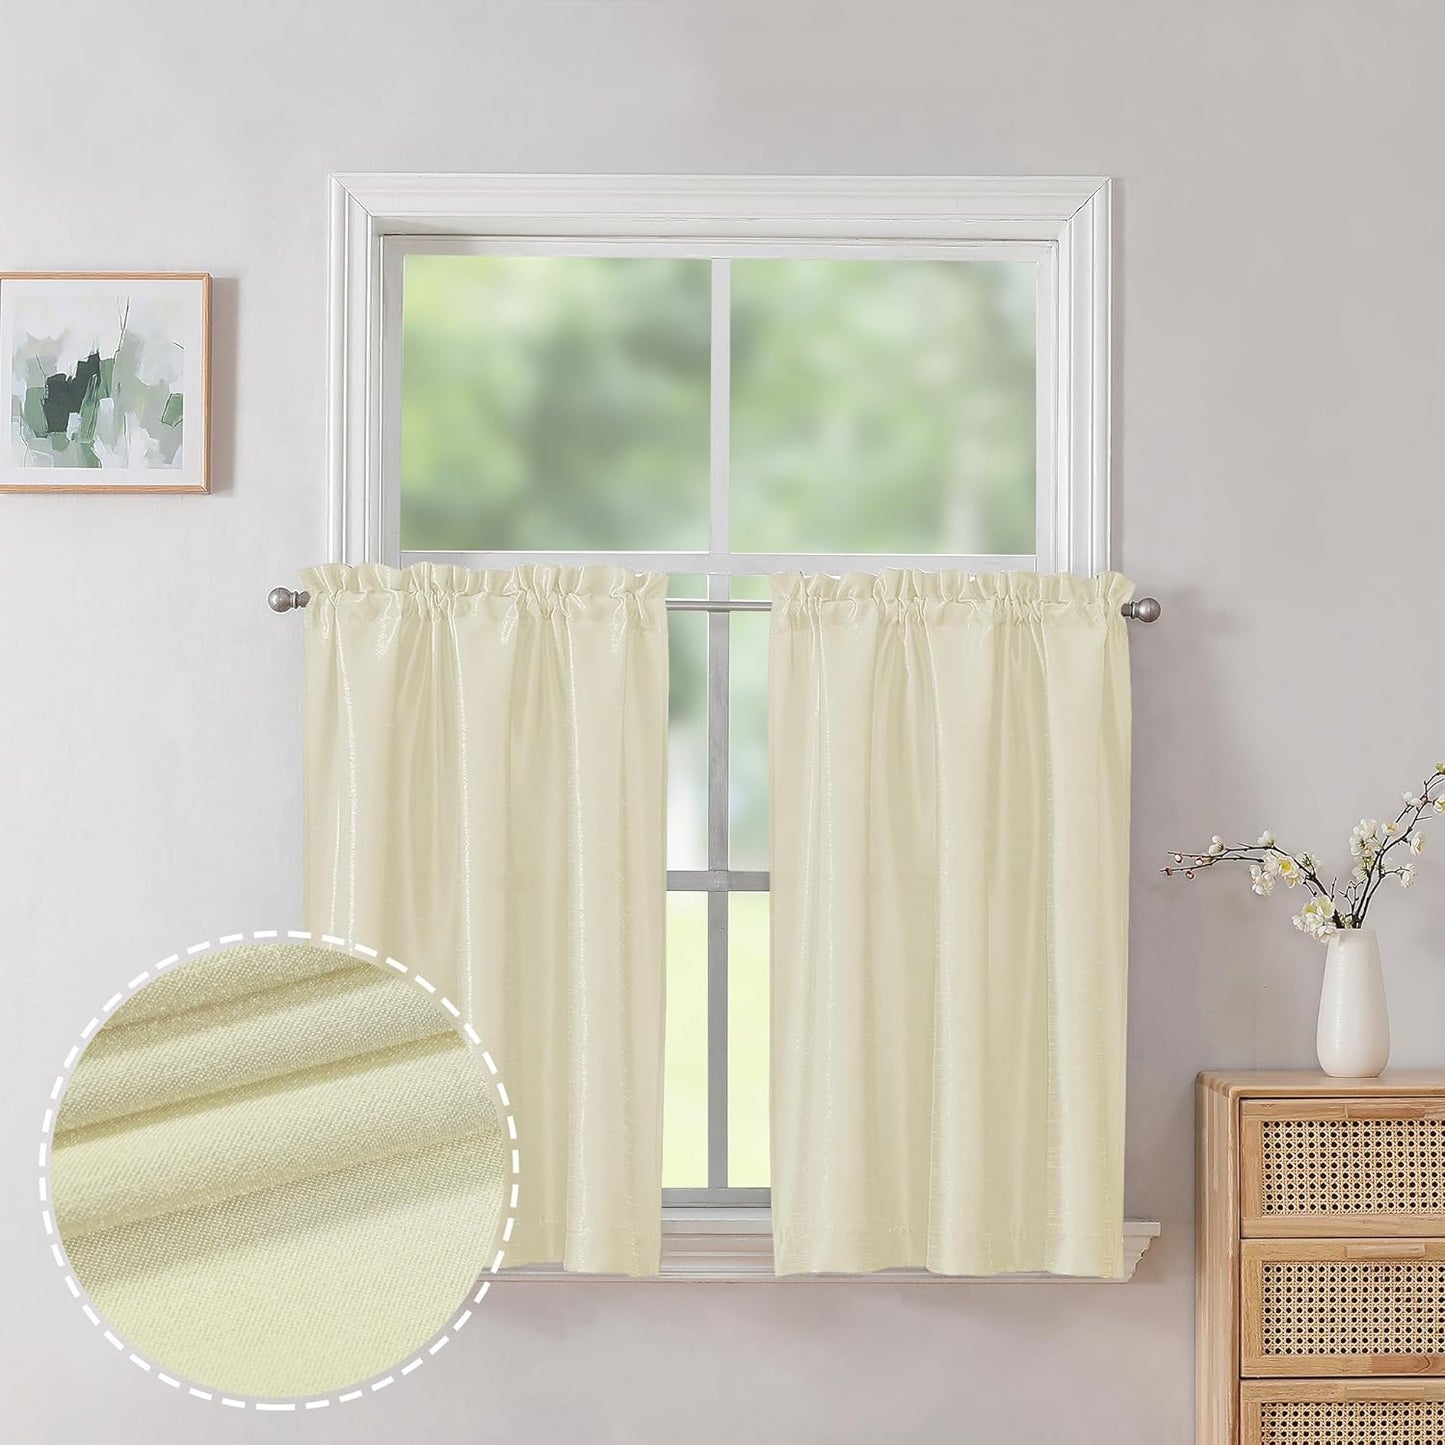 Chyhomenyc Uptown Sage Green Kitchen Curtains 45 Inch Length 2 Panels, Room Darkening Faux Silk Chic Fabric Short Window Curtains for Bedroom Living Room, Each 30Wx45L  Chyhomenyc Ivory 2X40"Wx36"L 